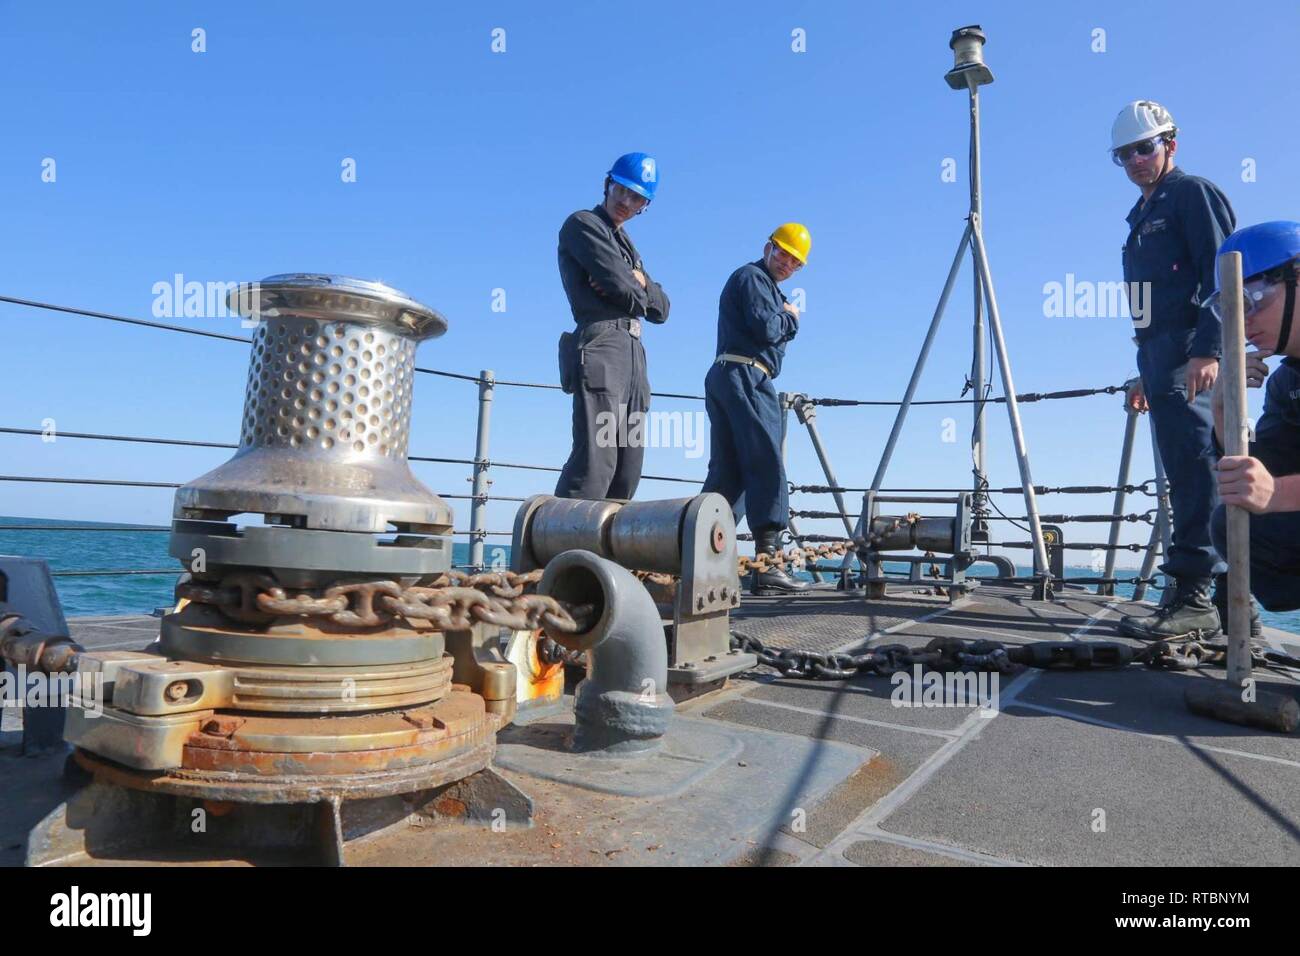 ARABIAN GULF (Feb. 9, 2019) Sailors observe the anchor chain lowering aboard the Cyclone-class coastal patrol ship USS Thunderbolt (PC 12). Thunderbolt is forward deployed to the U.S. 5th Fleet area of operations in support of naval operations to ensure maritime stability and security in the Central region, connecting the Mediterranean and the Pacific through the western Indian Ocean and three strategic choke points. Stock Photo